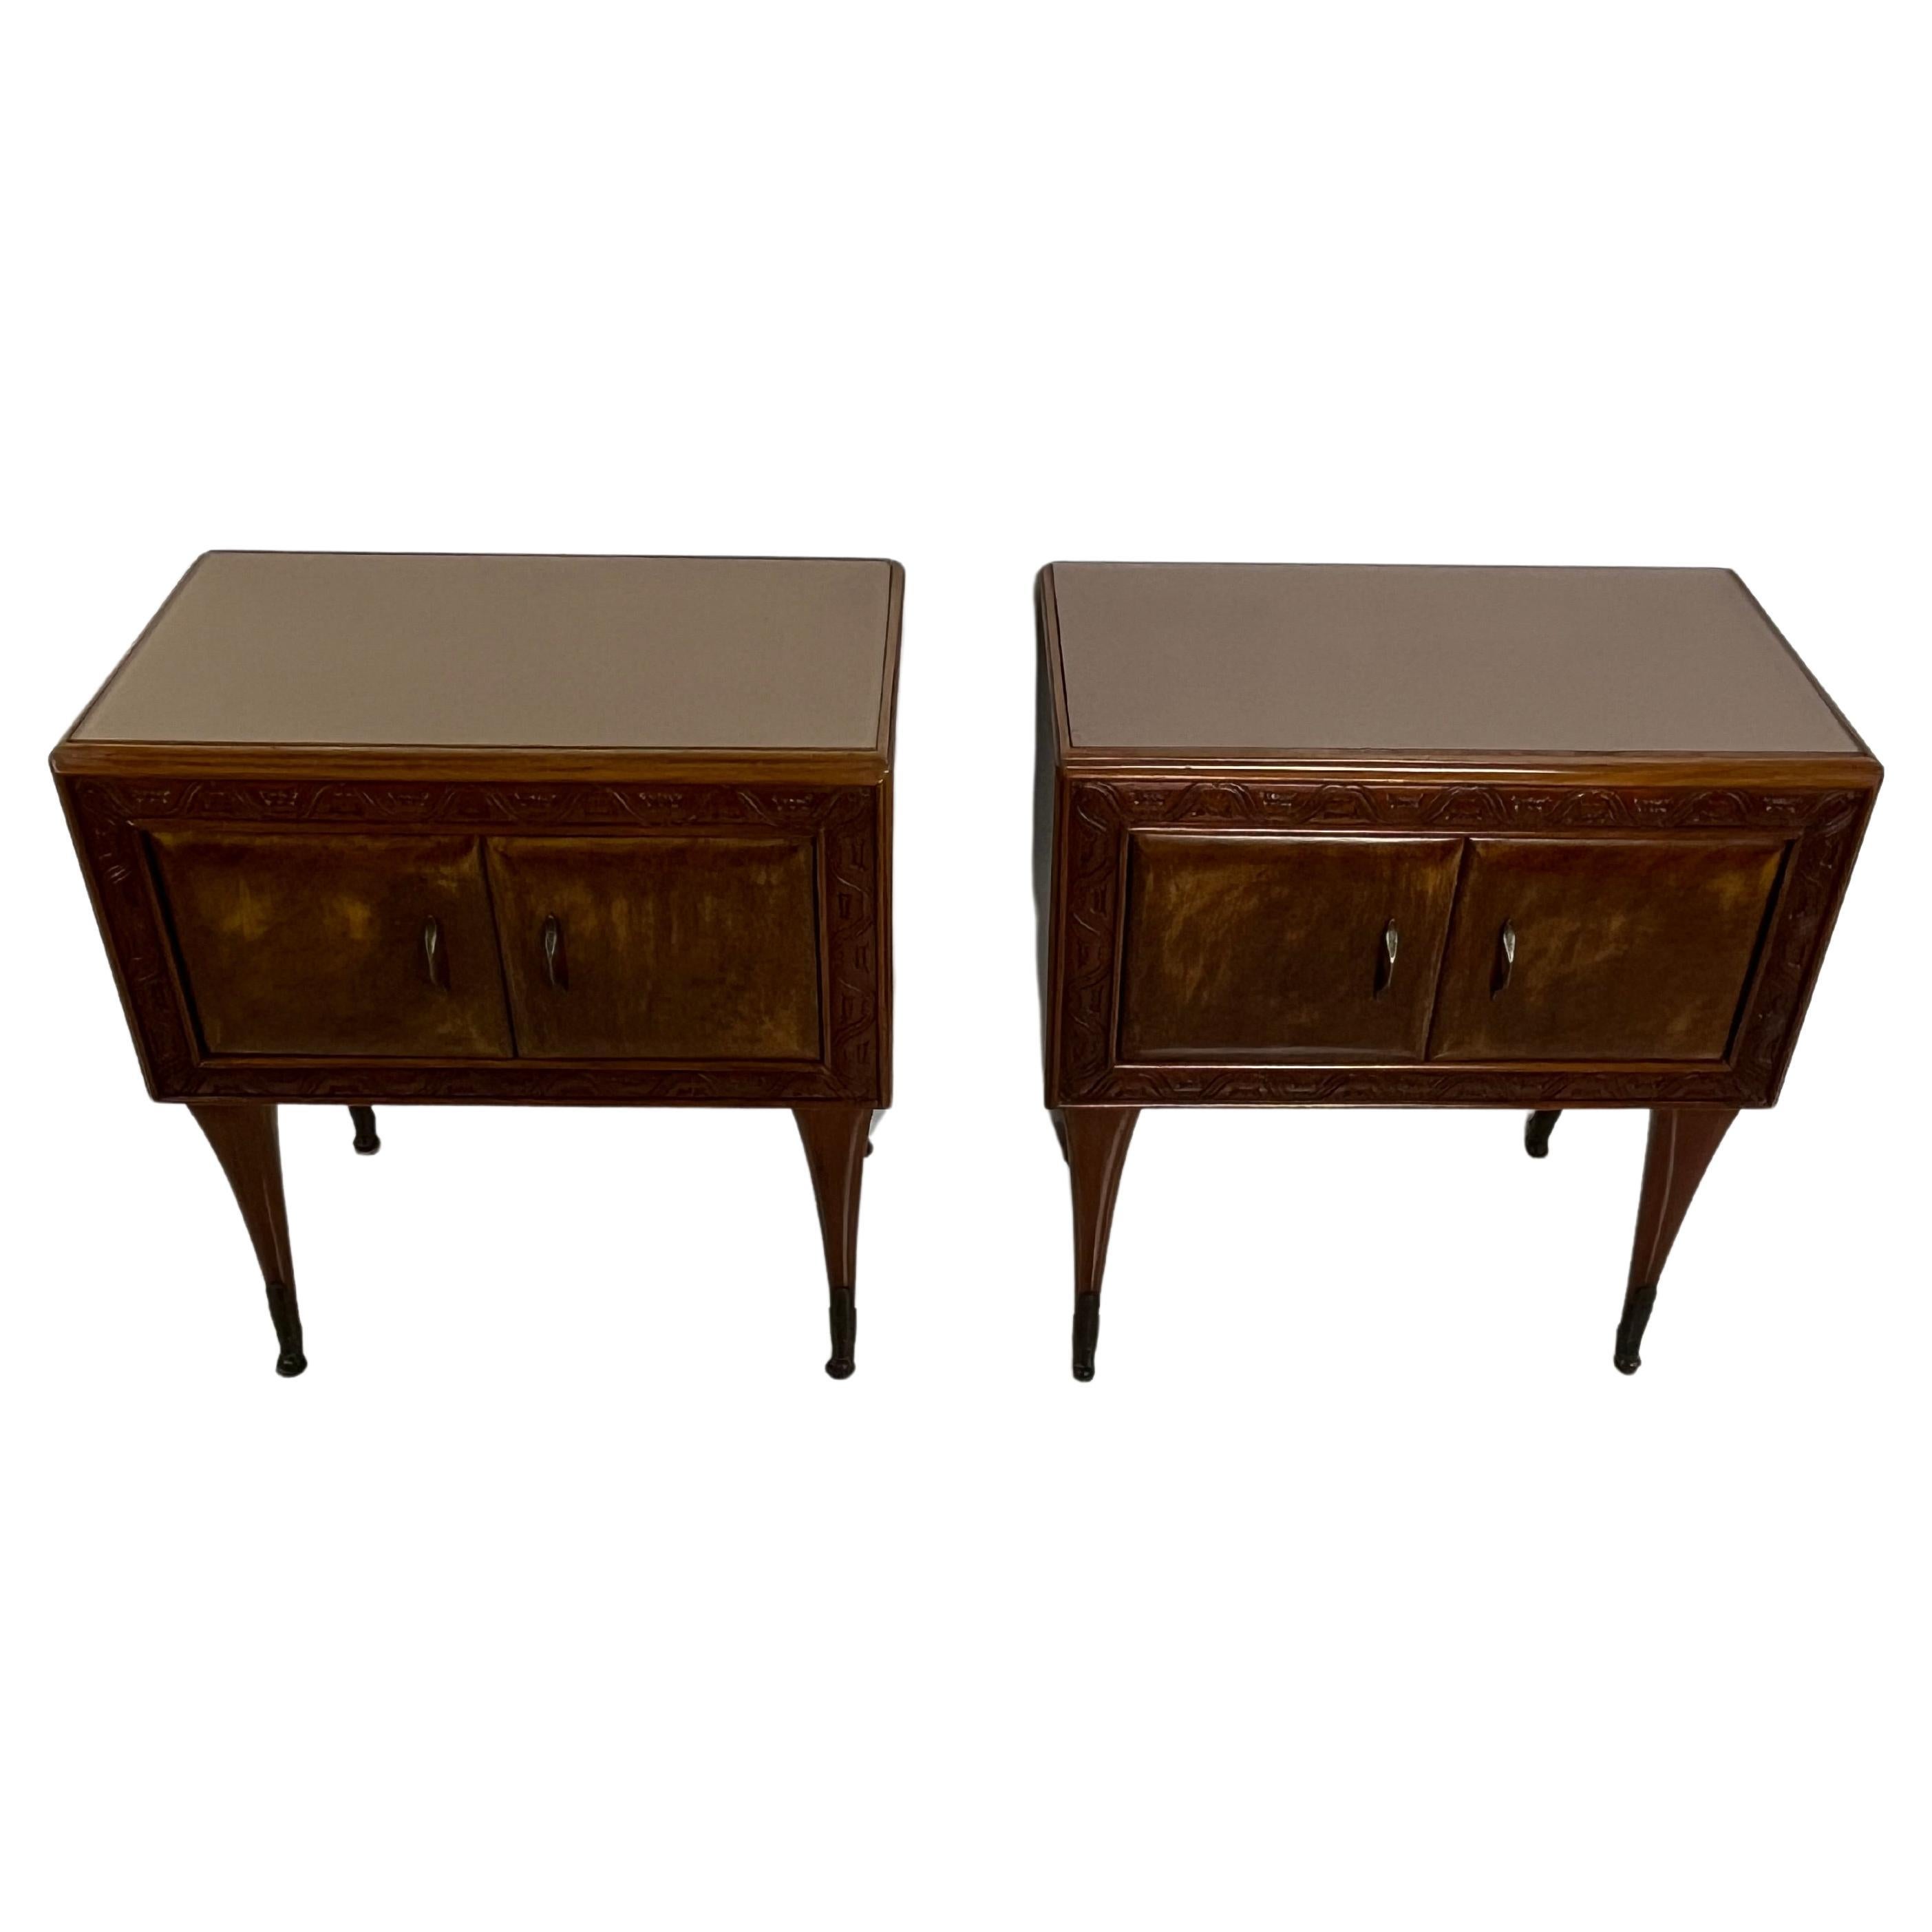 Set Of 2 Mid-Century Italian Design 1950s Bedside Tables For Sale